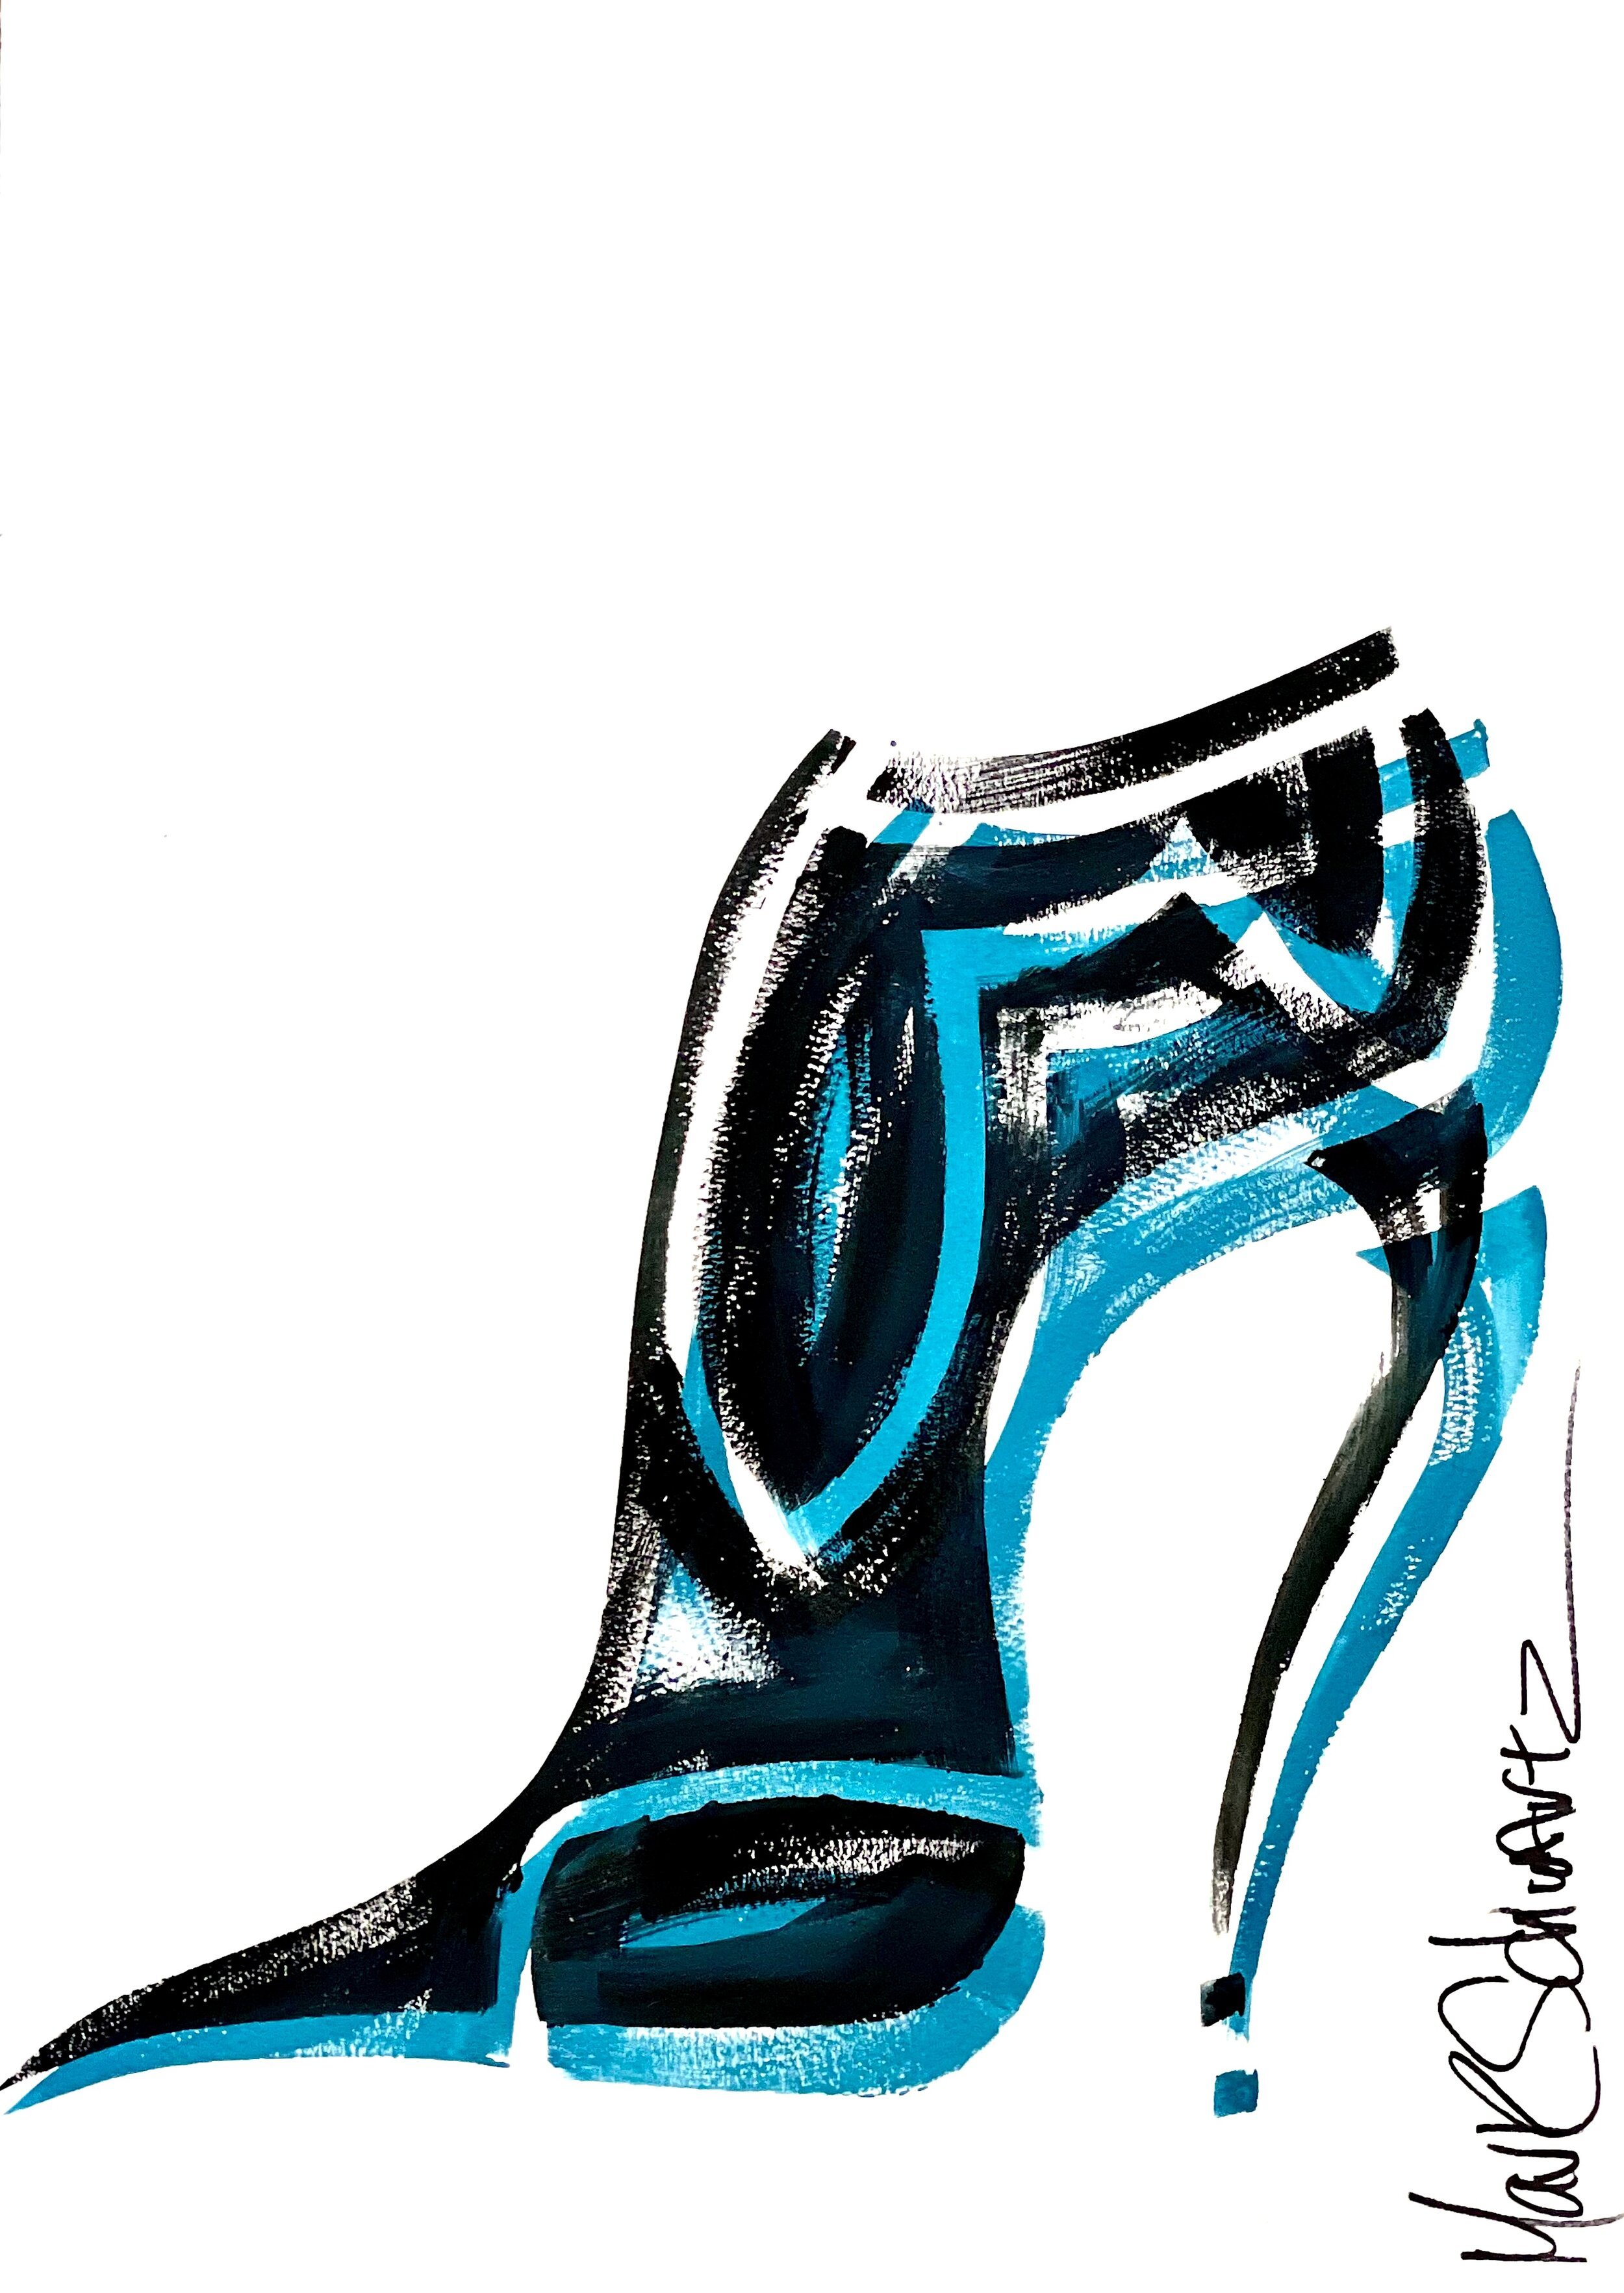 High Heels Drawing - How To Draw High Heels Step By Step